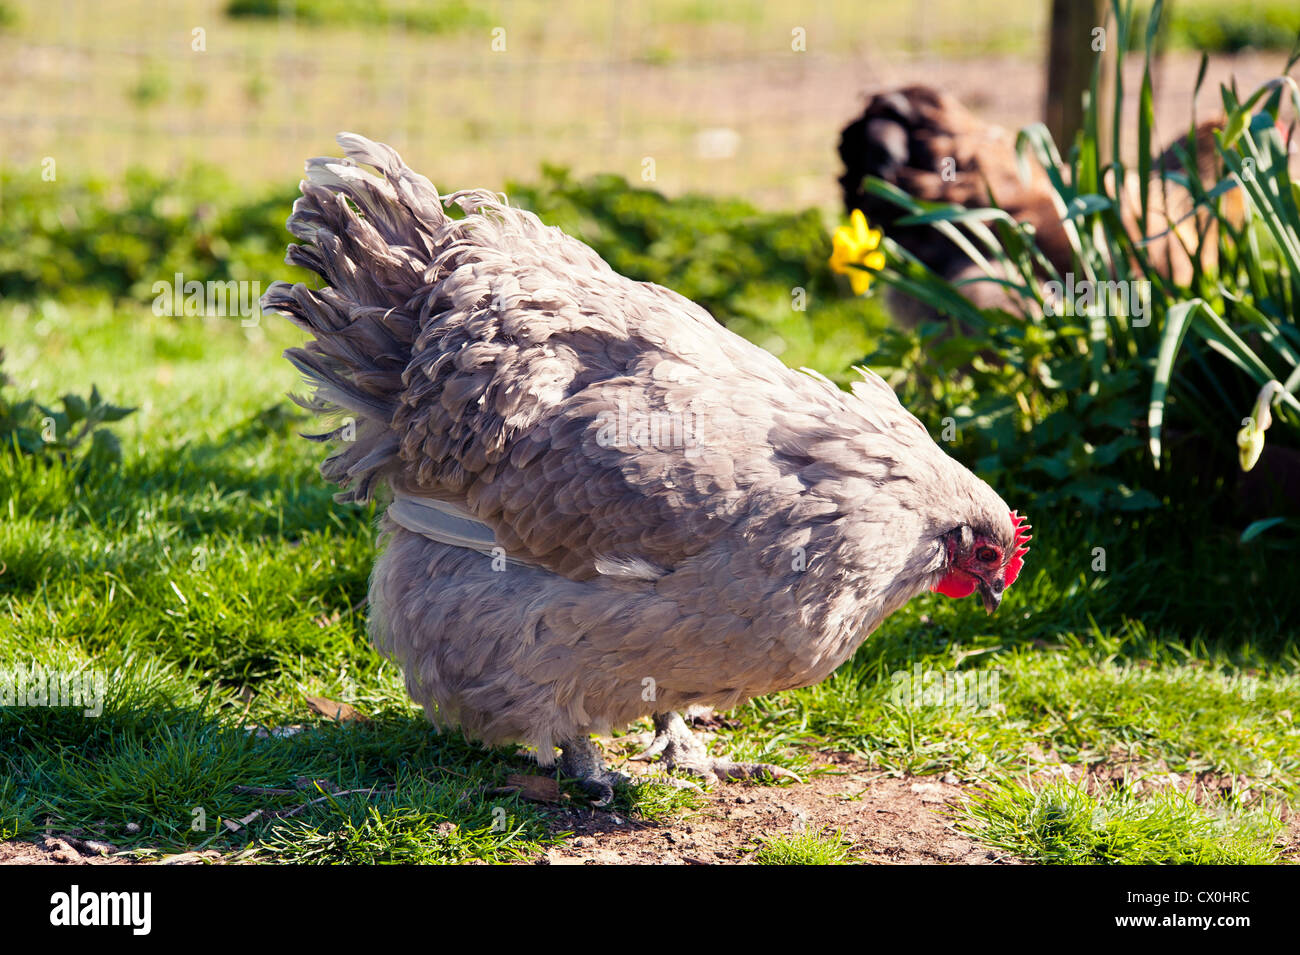 Lavender Orpington hen looking for food, background out of focus